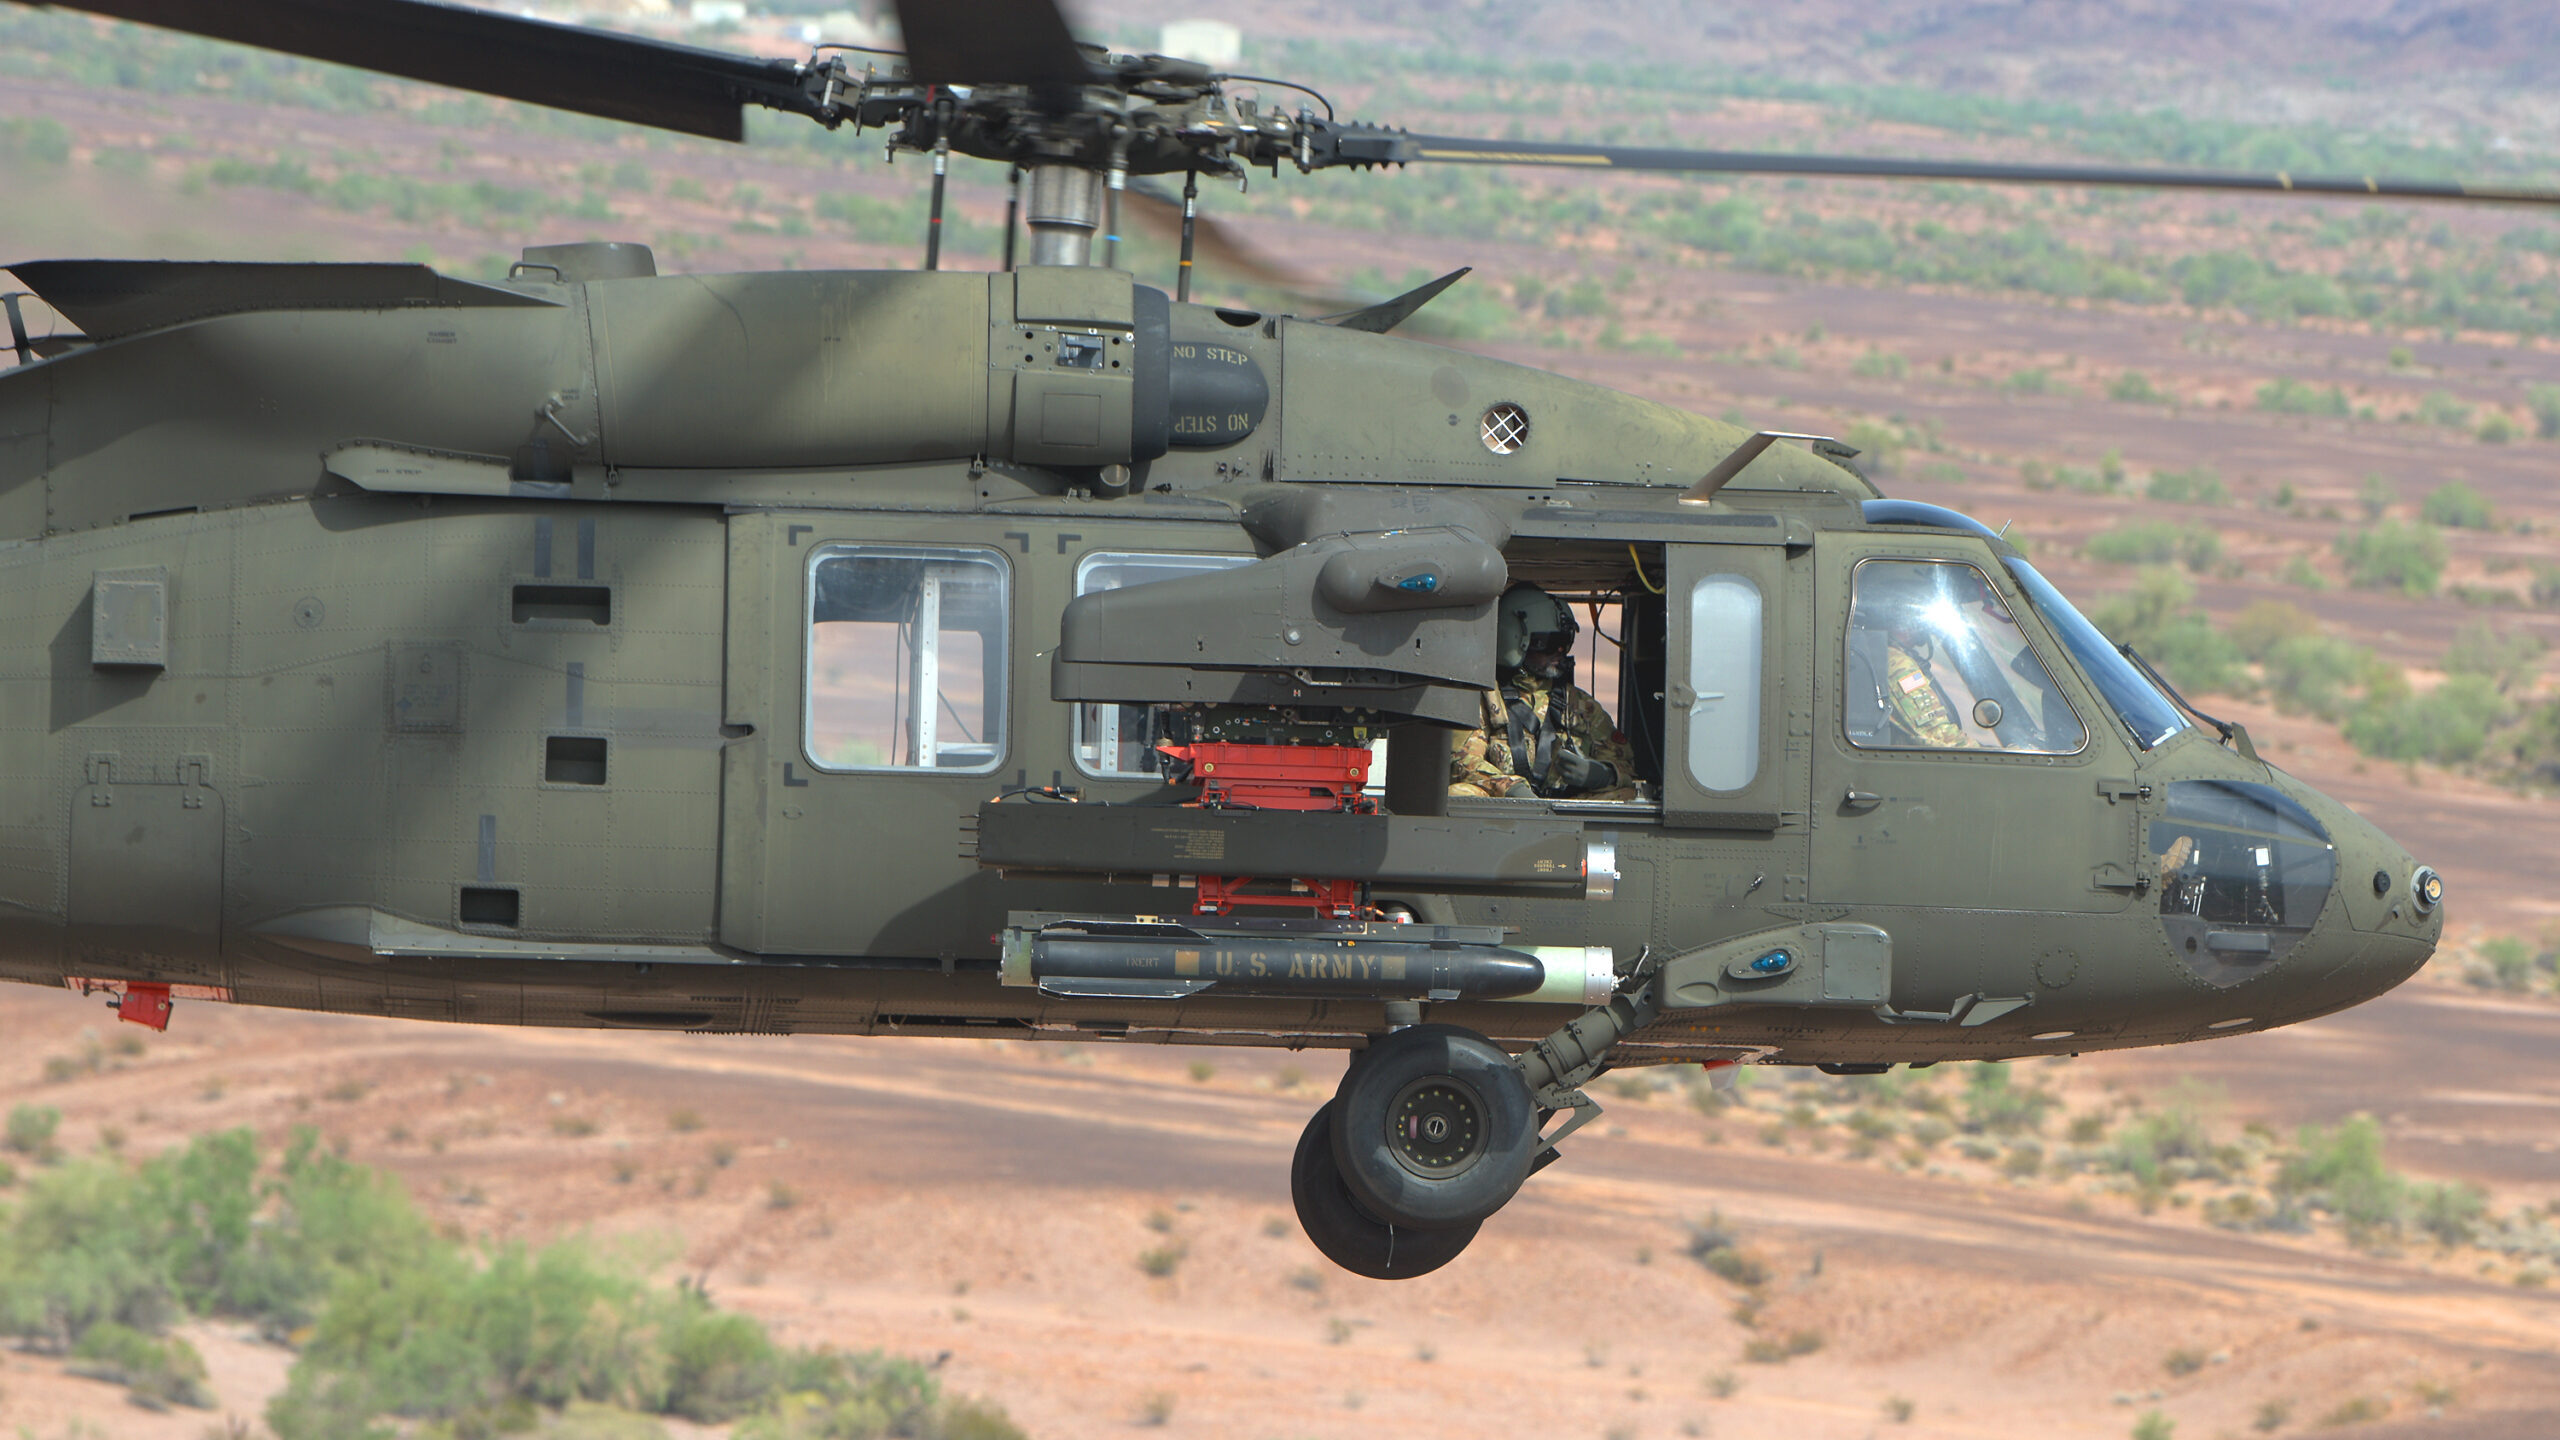 Lack of future helo doesn’t stop Army’s Future Vertical Lift experiments in the desert